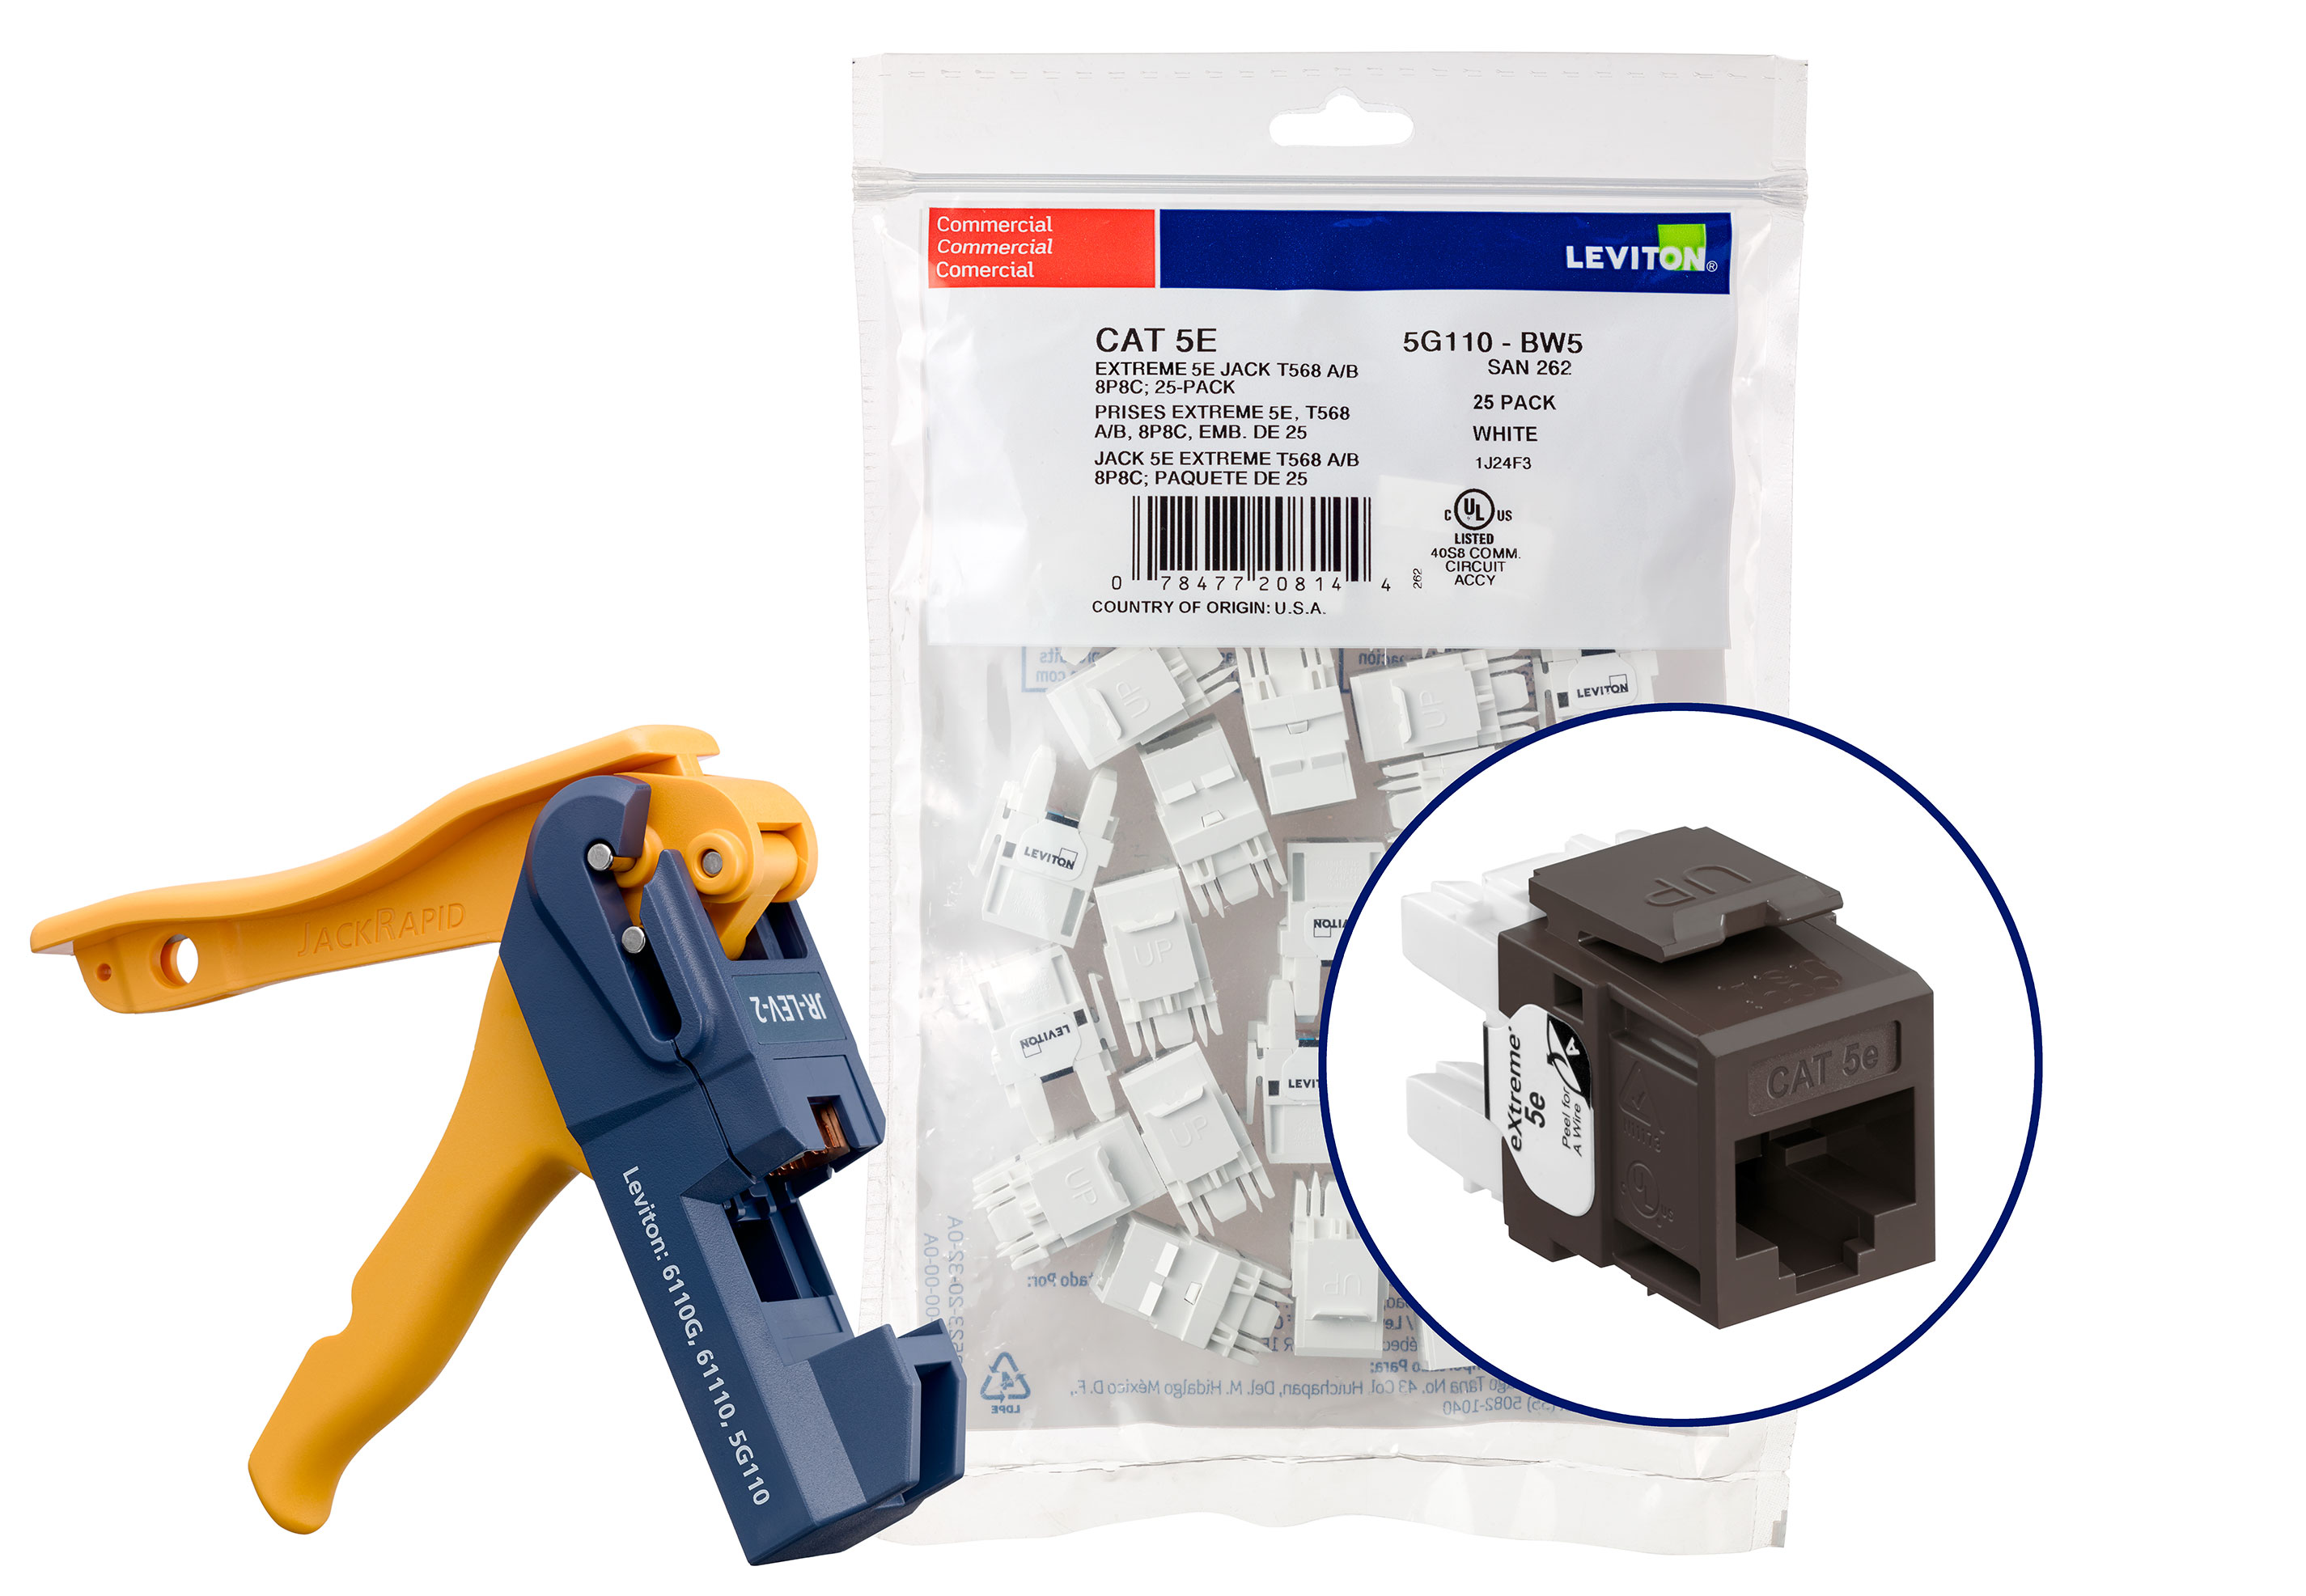 Cat 5e+ (5g110) Connectors Kitted With Jack Rapid Tool, 1 Fg = 6 Quickpacks (25 Connectors Per Quickpack),Total Of 150 Connectors, Plus 1 Jack Rapid Tool-Brown